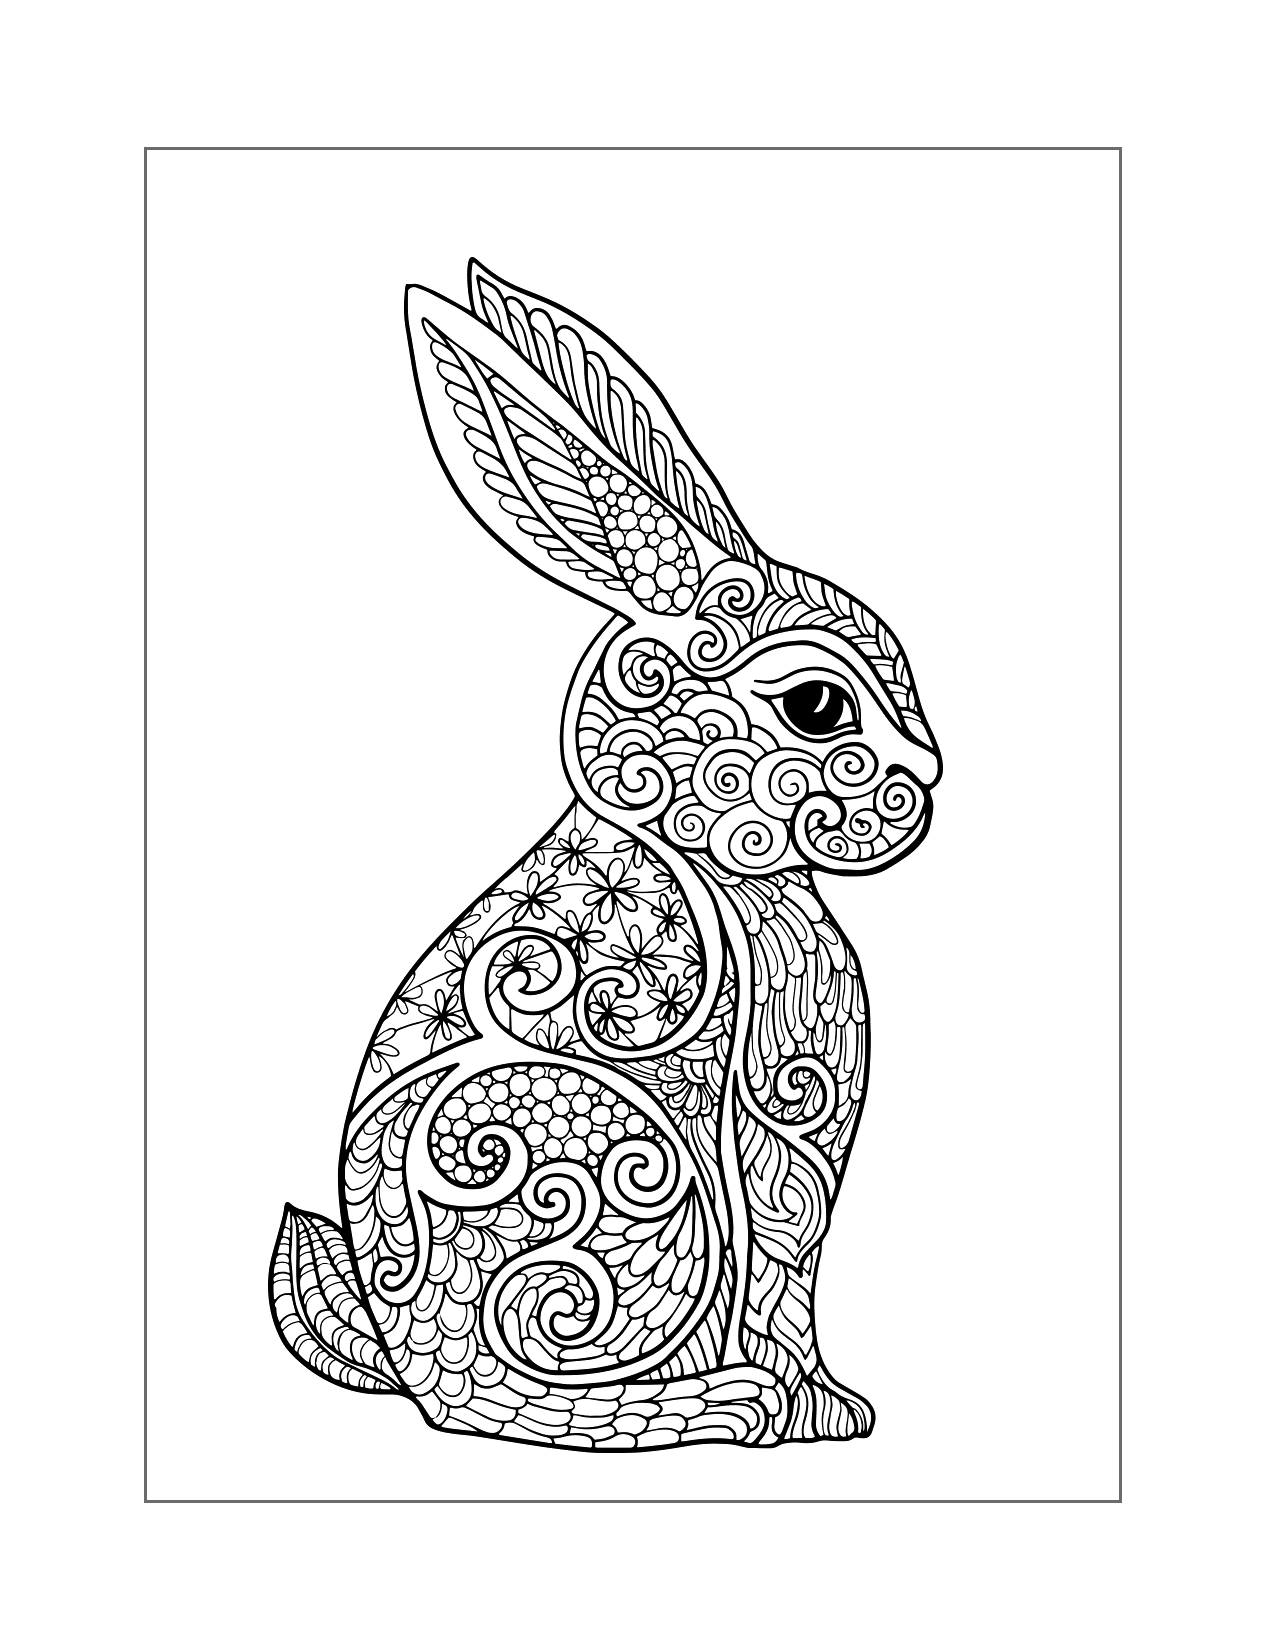 Zen Swirl Coloring Page